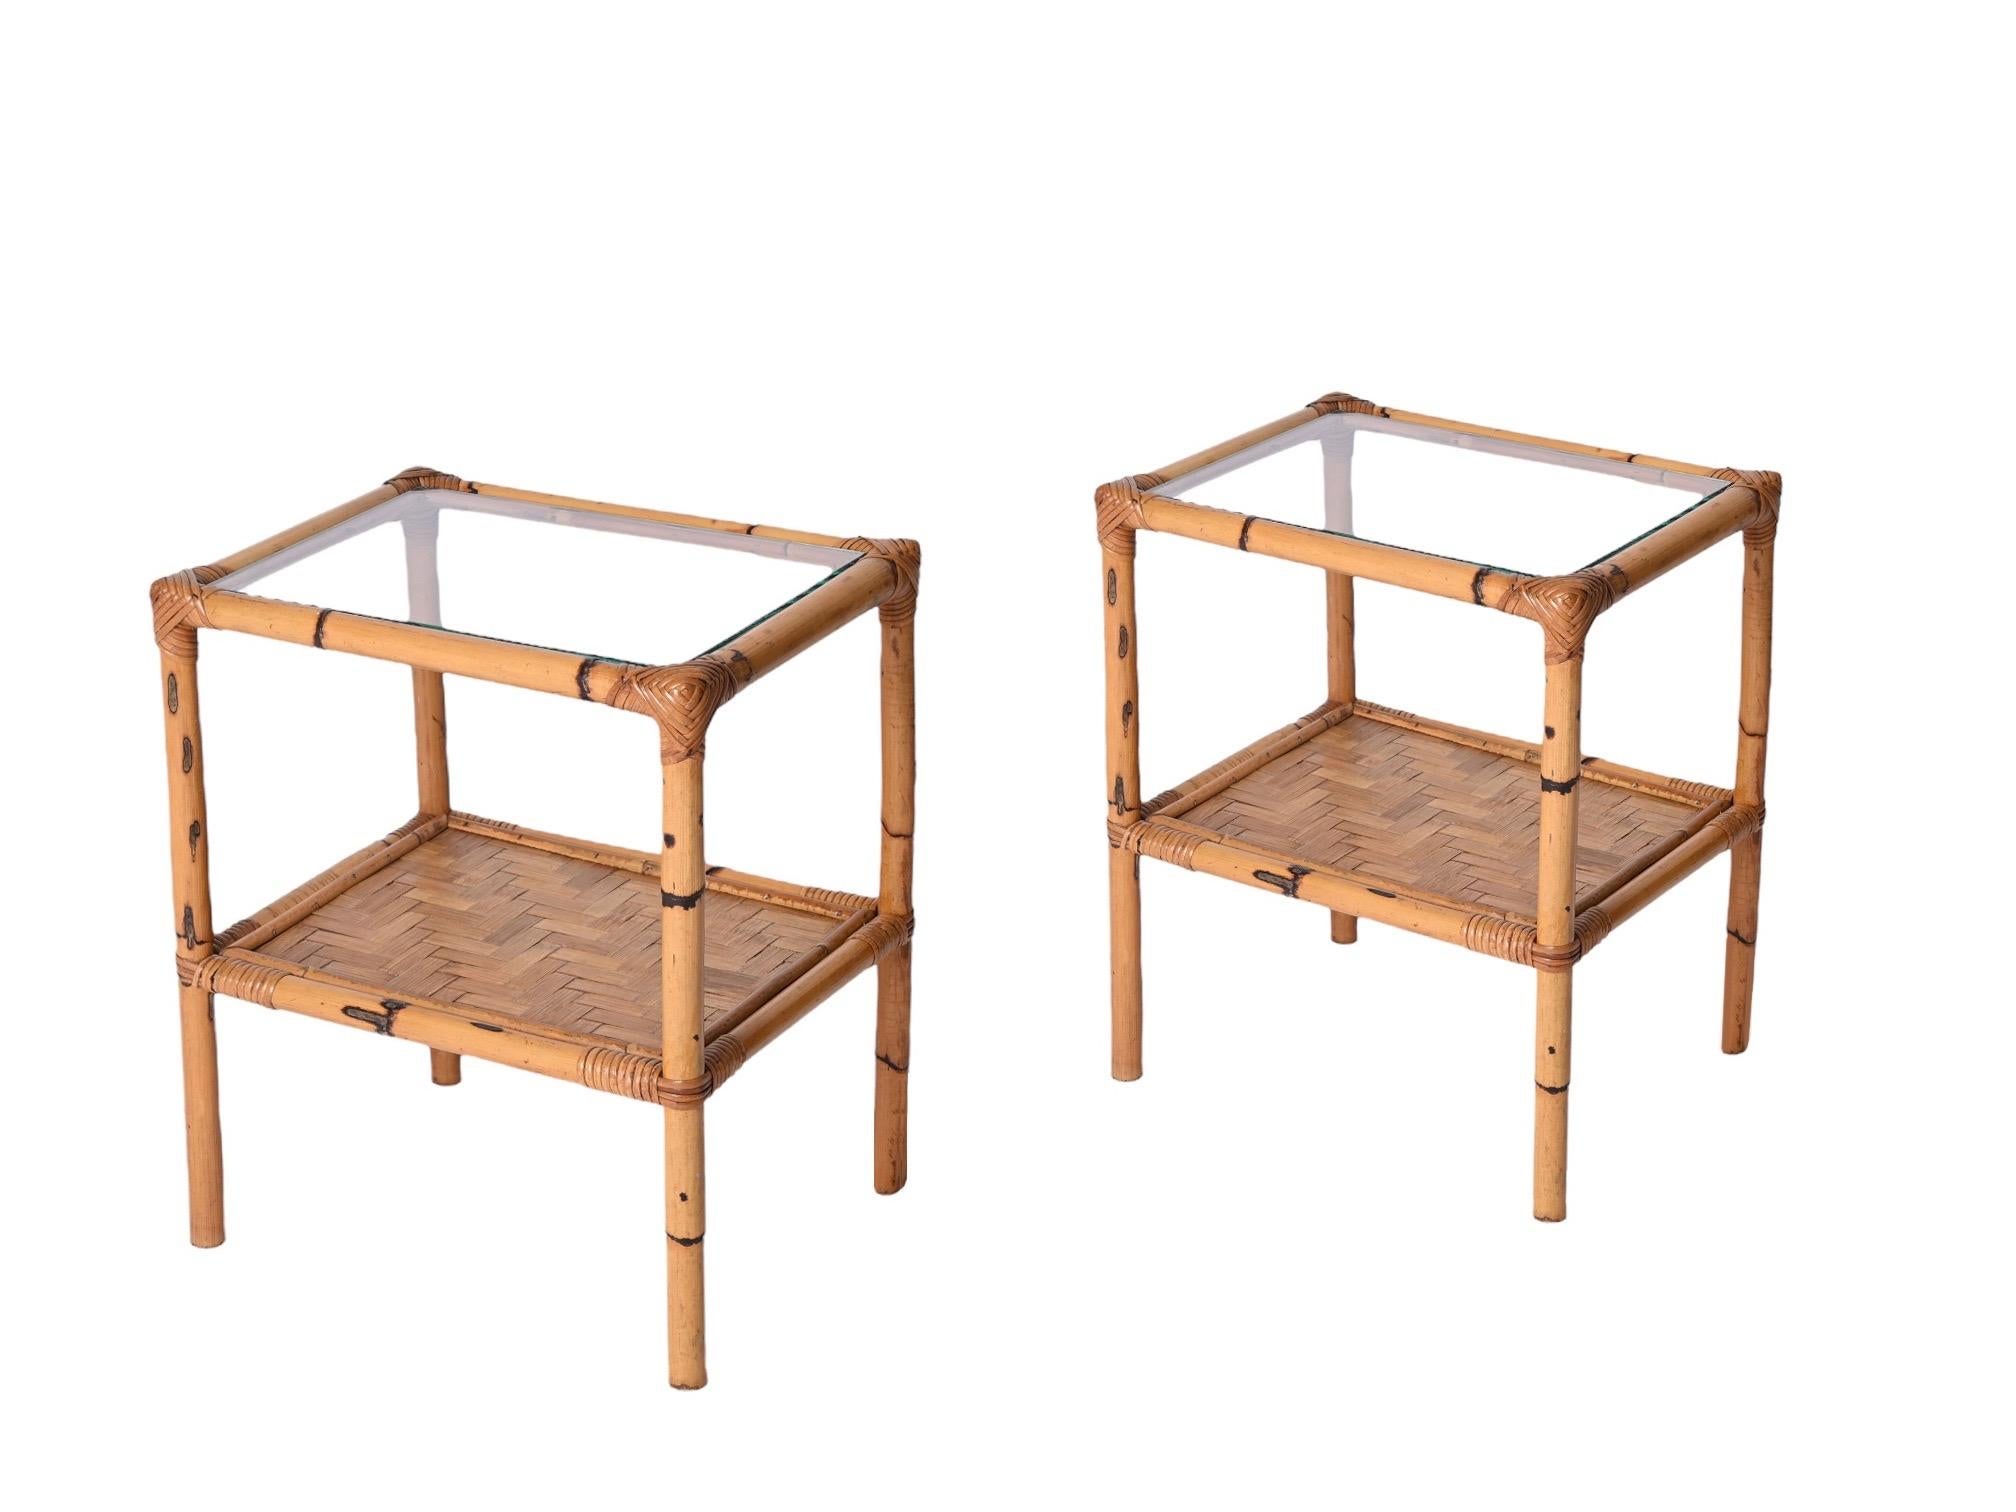 Pair of Mid-Century Italian Bedside Tables in Bamboo, Rattan and Glass, 1970s For Sale 6